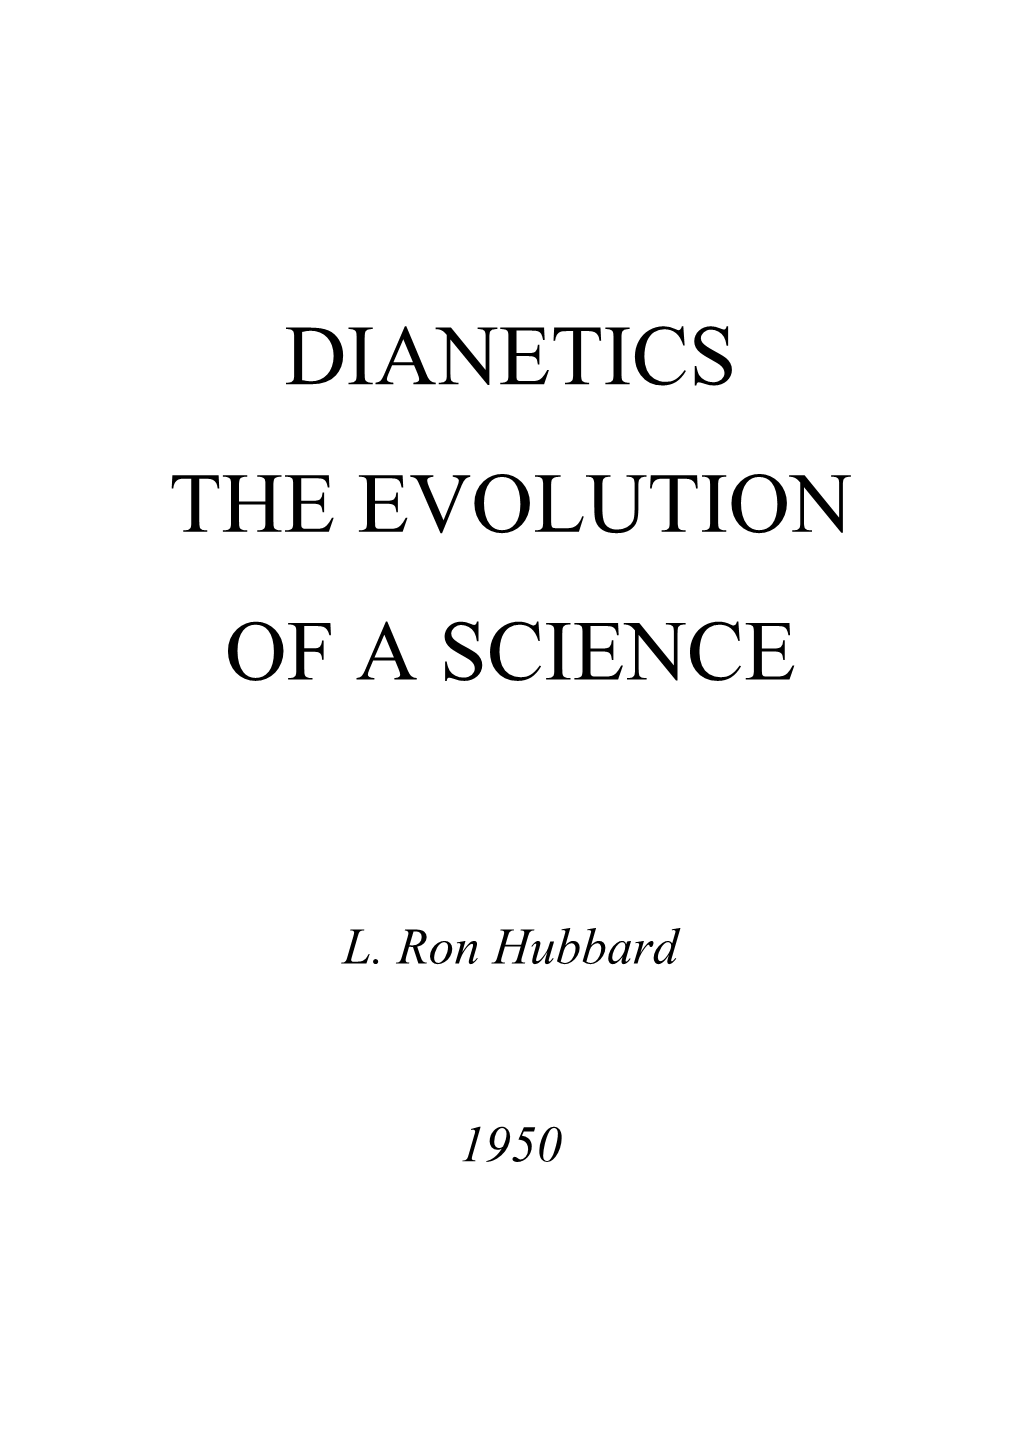 Dianetics the Evolution of a Science